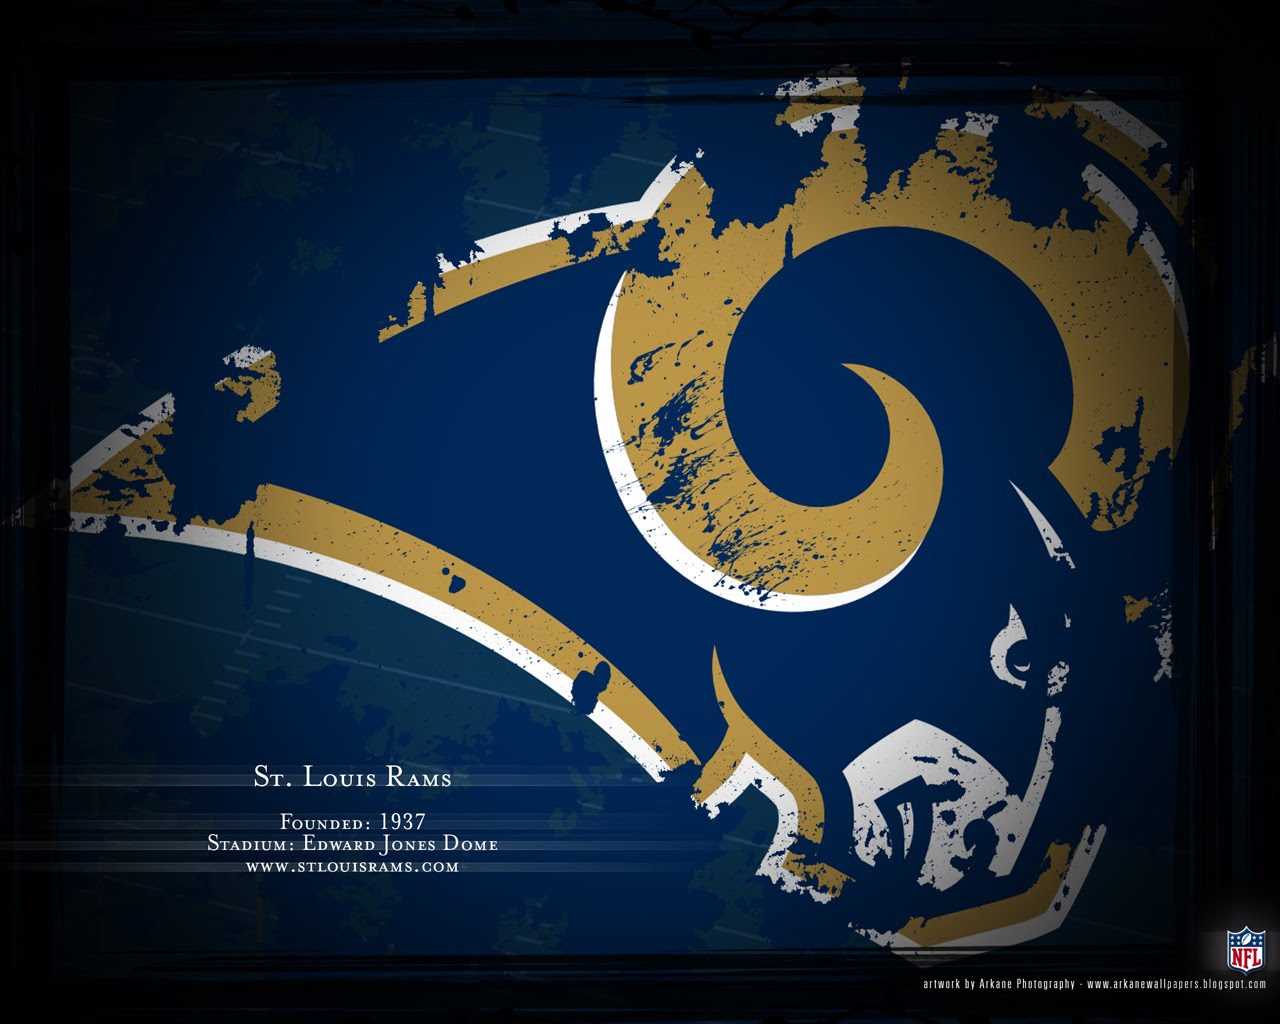 New Nfl Stadium In St Louis Los Angeles For Rams